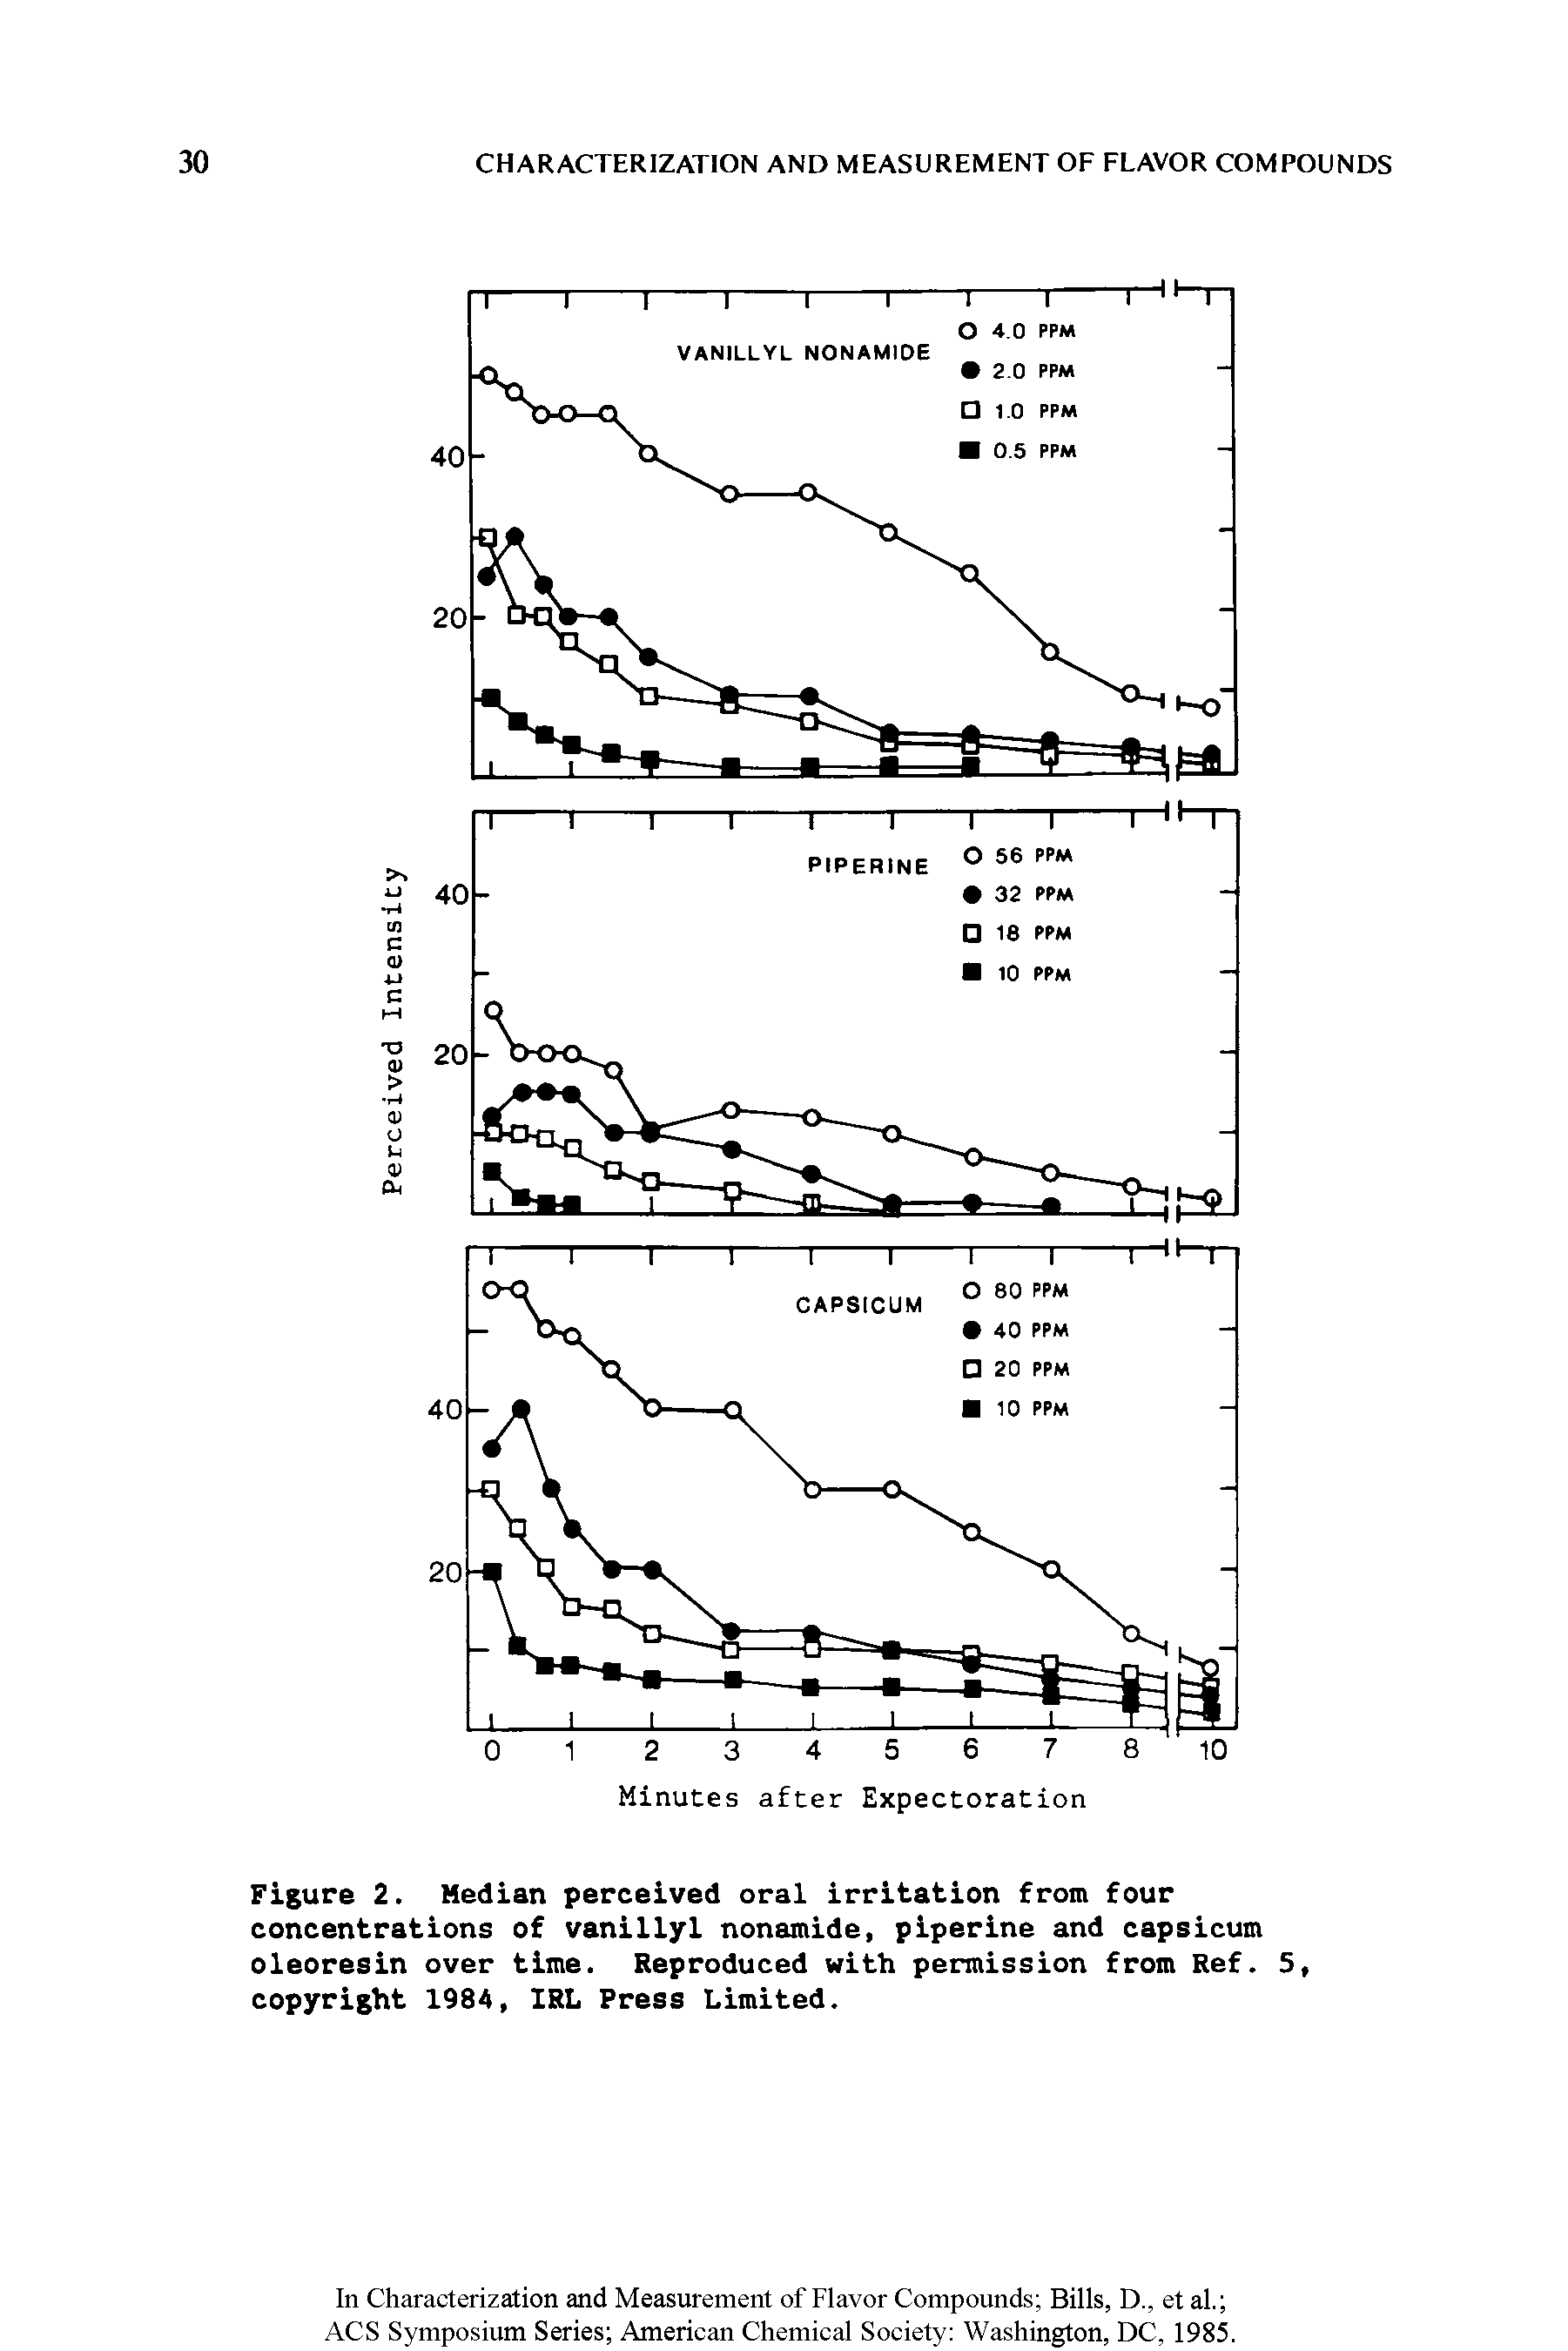 Figure 2. Median perceived oral irritation from four concentrations of vanillyl nonamide, piperine and capsicum oleoresin over time. Reproduced with permission from Ref. 5, copyright 1984, IRL Press Limited.